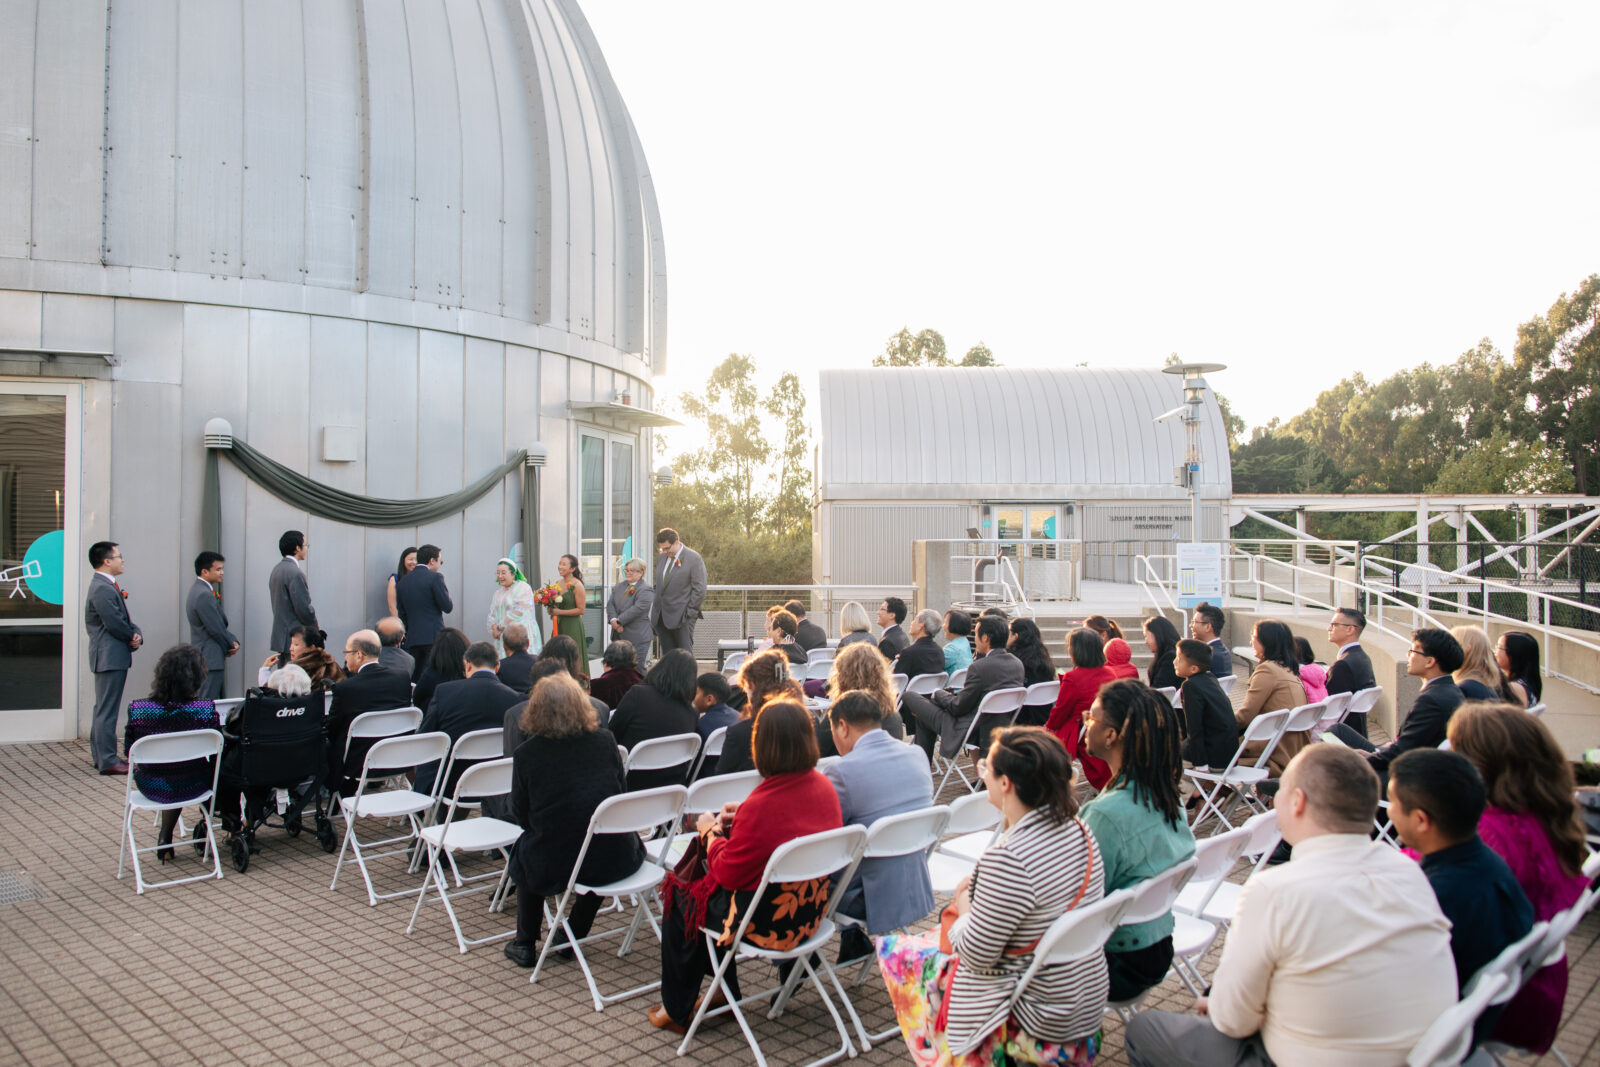 Wedding at Chabot Space & Science Center